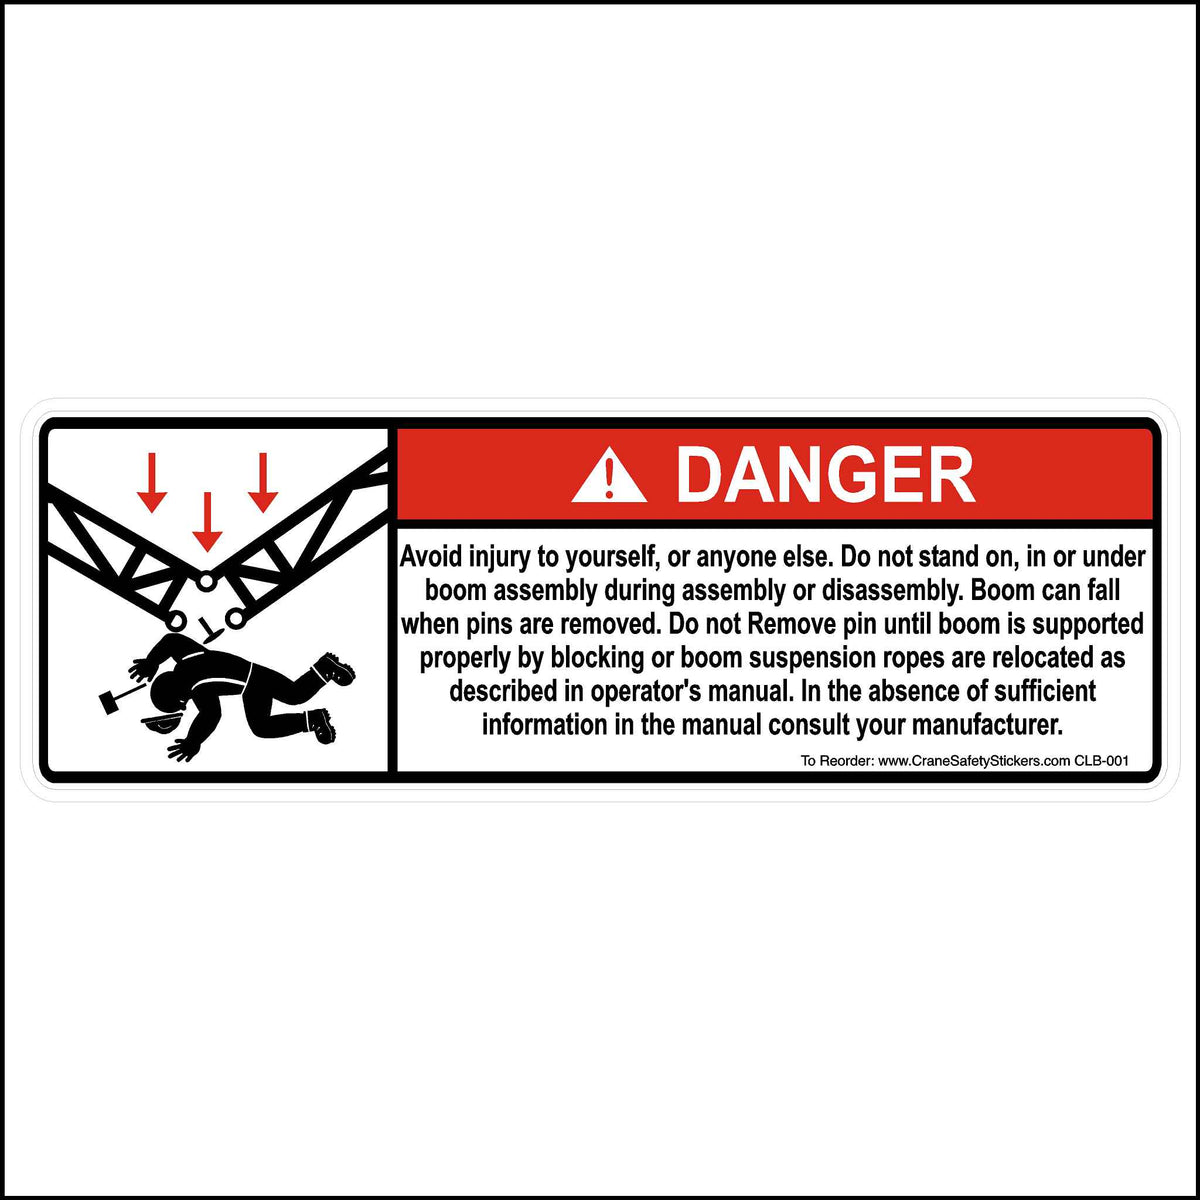 3x9 Inch Lattice Boom Safety Sticker Printed With, DANGER, Avoid injury to yourself, or anyone else. Do not stand on, in or under boom assembly during assembly or disassembly. Boom can fall when pins are removed. Do not Remove pin until boom is supported properly by blocking or boom suspension ropes are relocated as described in operator&#39;s manual. In the absence of sufficient information in the manual consult your manufacturer.